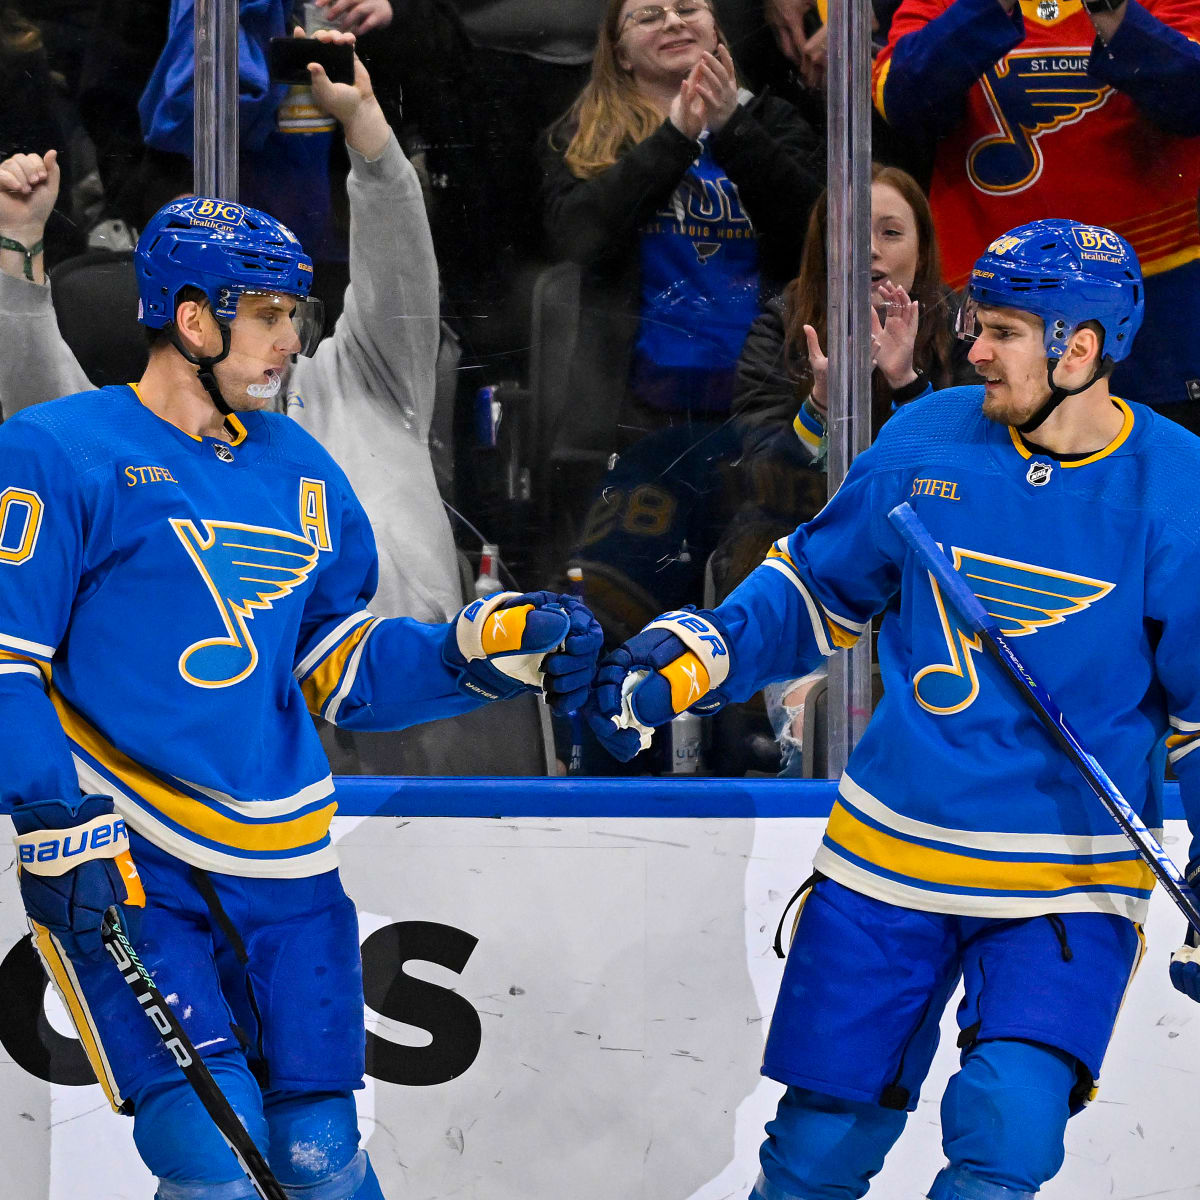 St. Louis Blues Lose 3 Players to Injury in Loss to Ducks